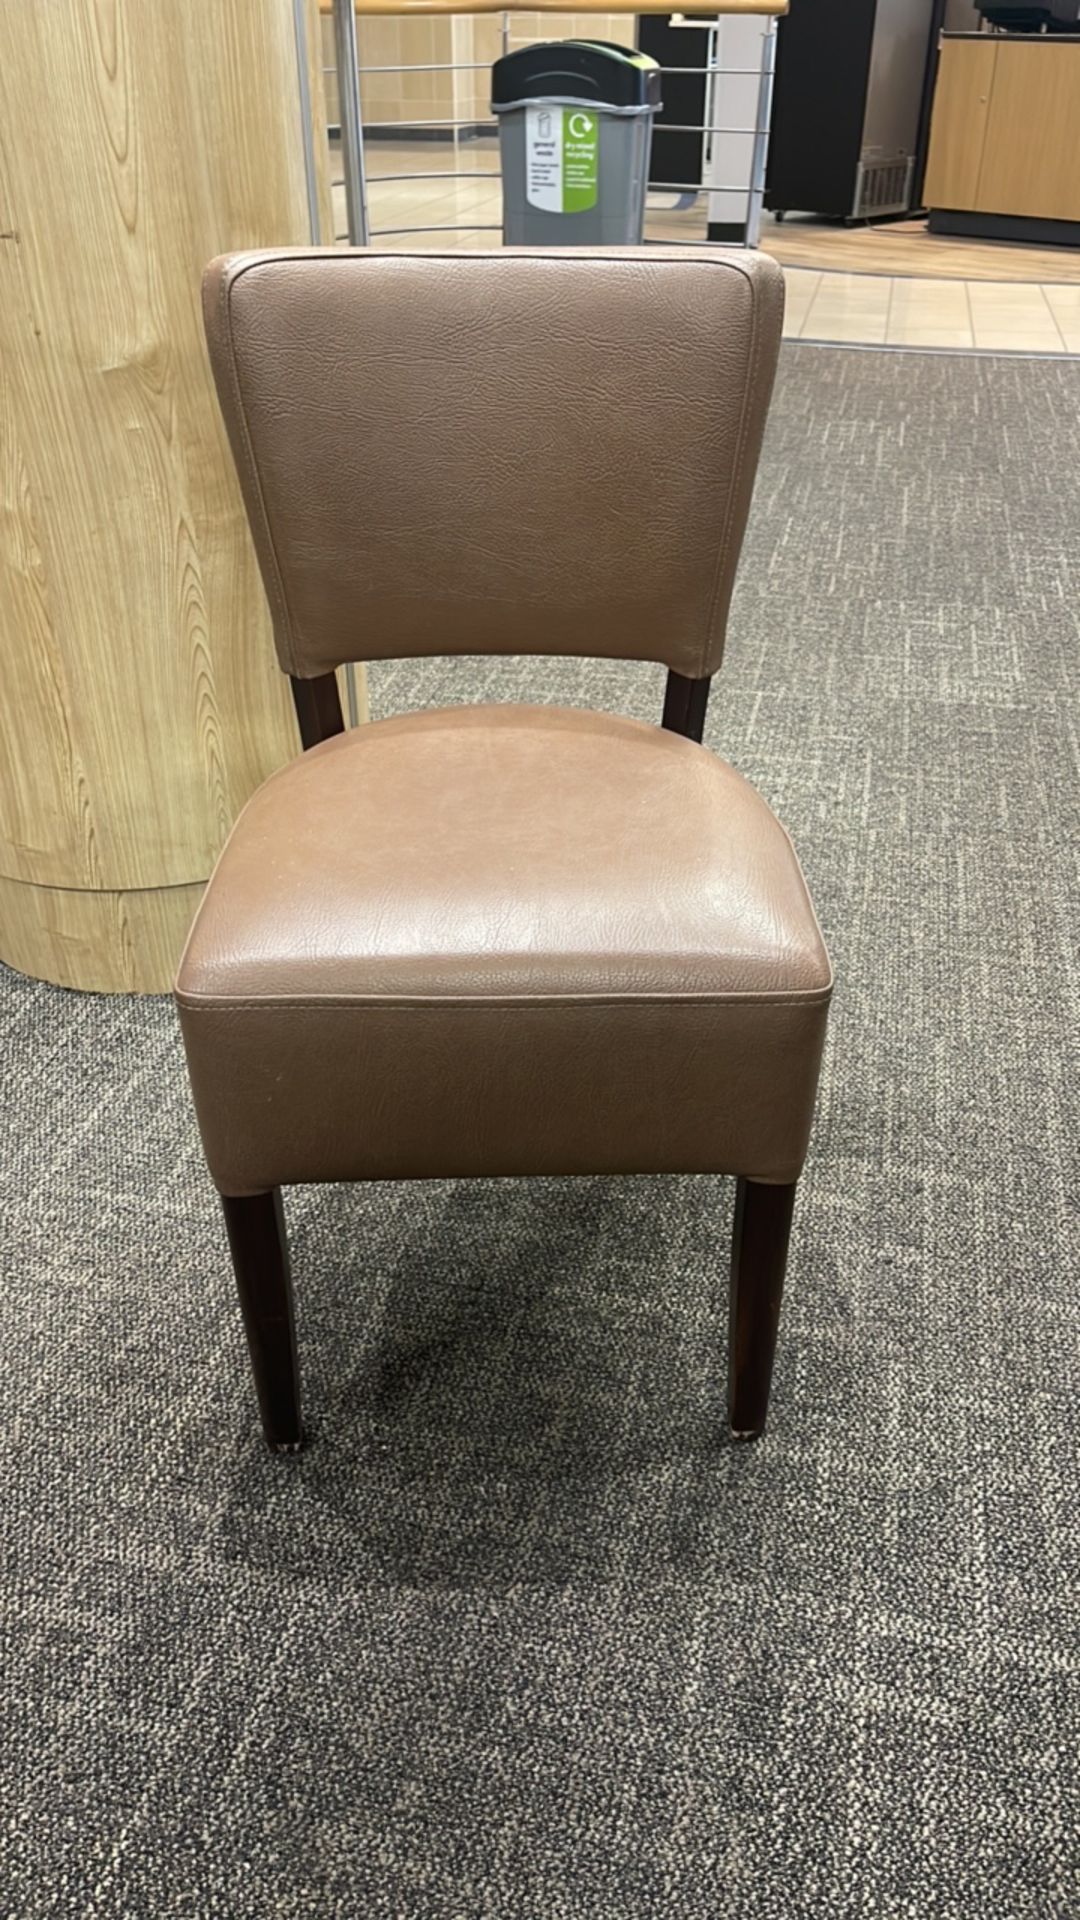 4 x Brown Leather Chairs and 1 x Square Table - Image 2 of 6